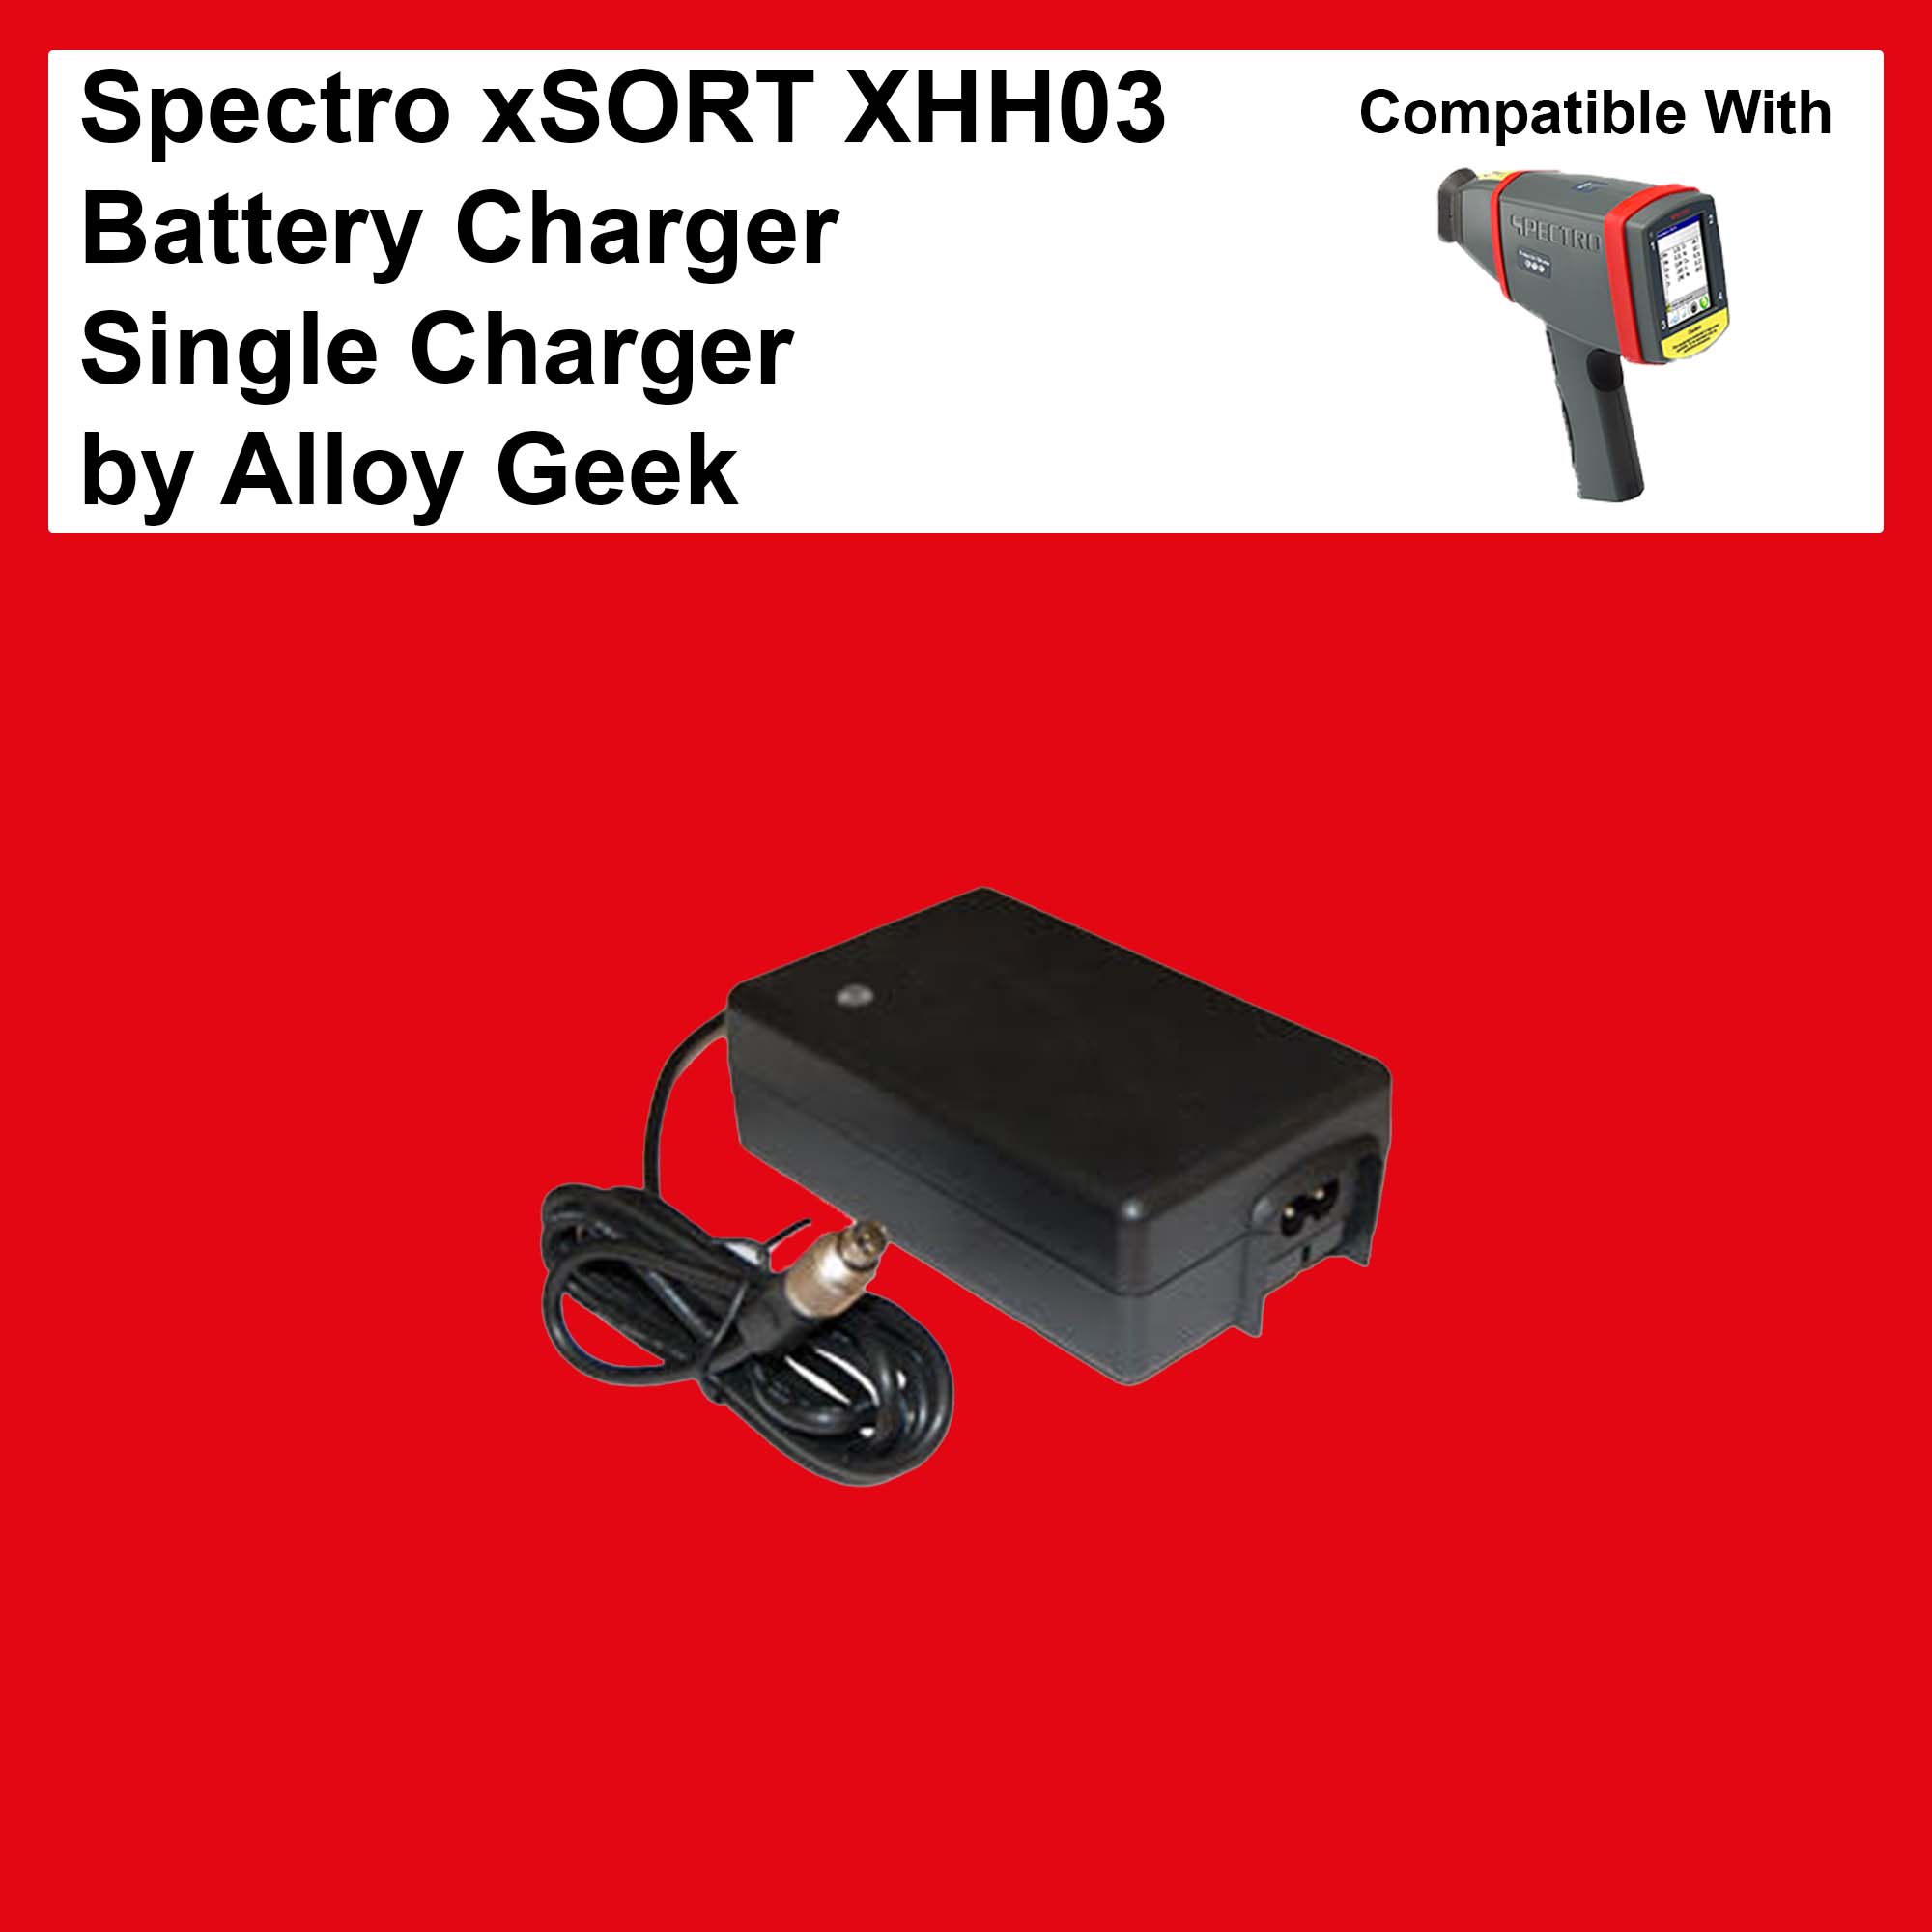 Spectro xSORT XHH03 Battery Charger PN 75040820